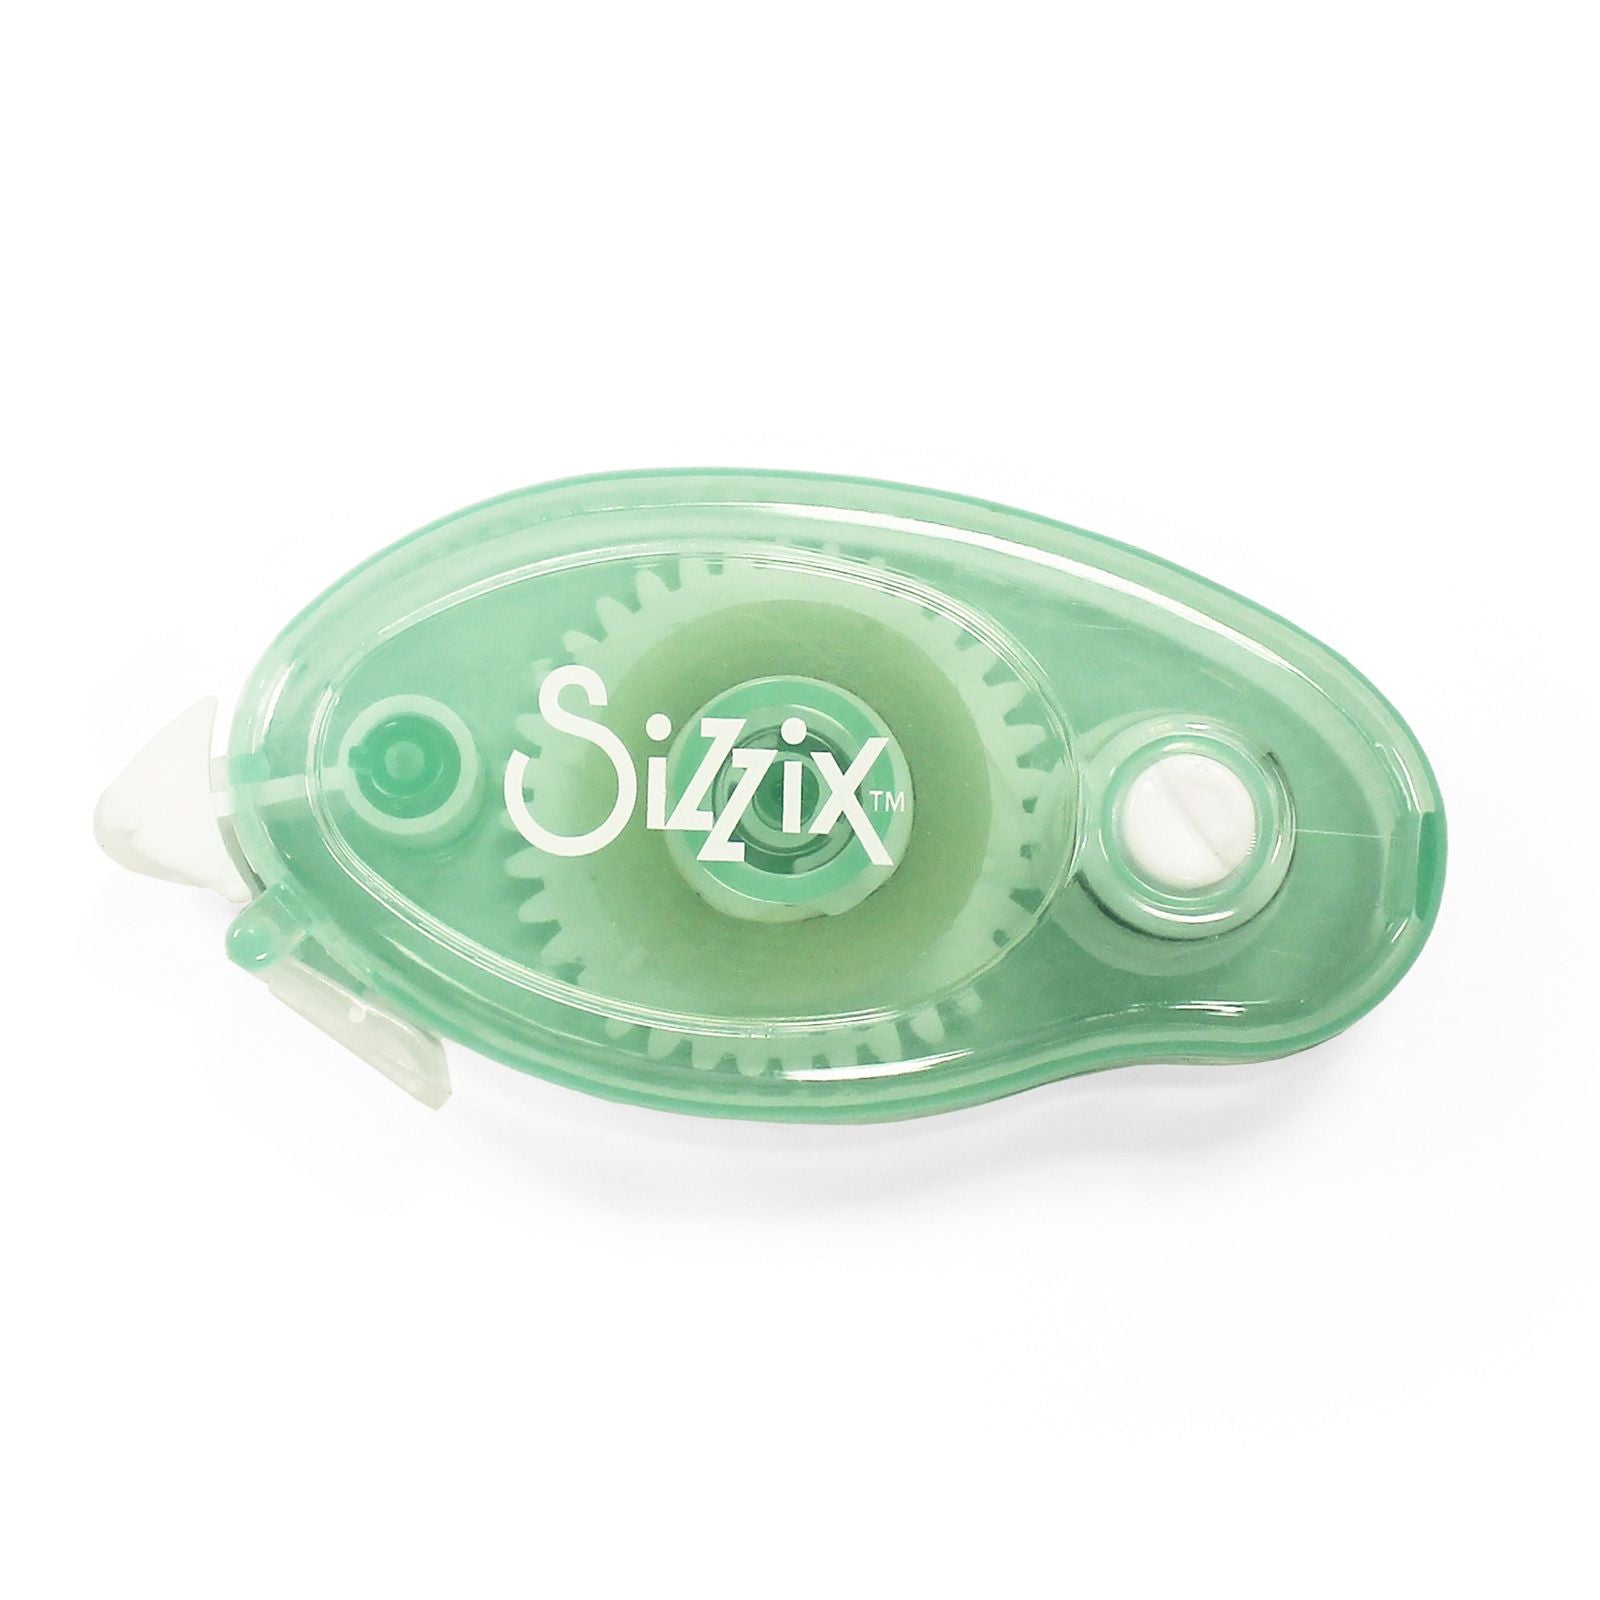 Sizzix Making Essential - Permanent Adhesive Roller